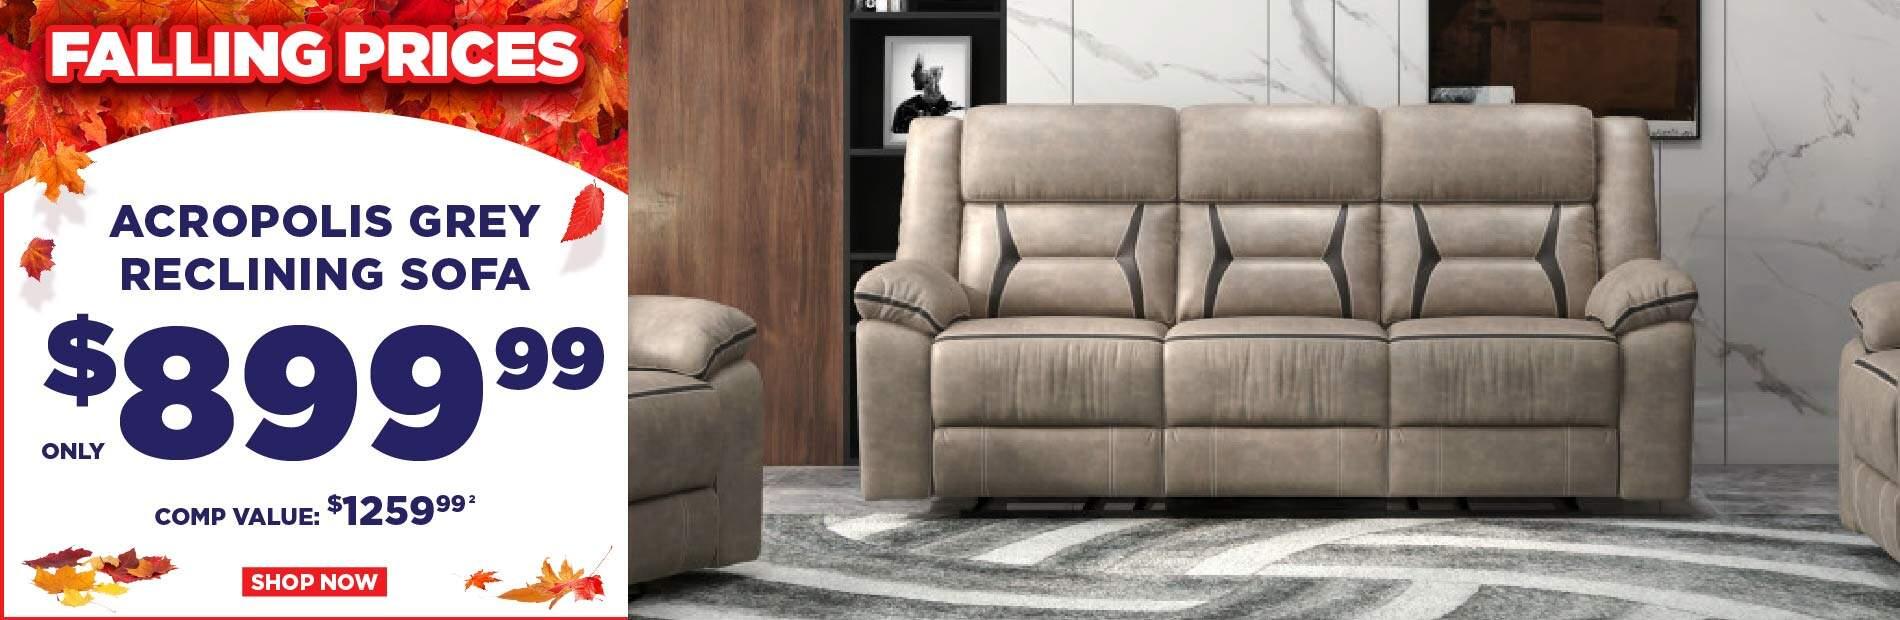 Falling Prices. Acropolis Grey Reclining Sofa only $899.99 Shop Now. Comp Value. $1259.99 2 